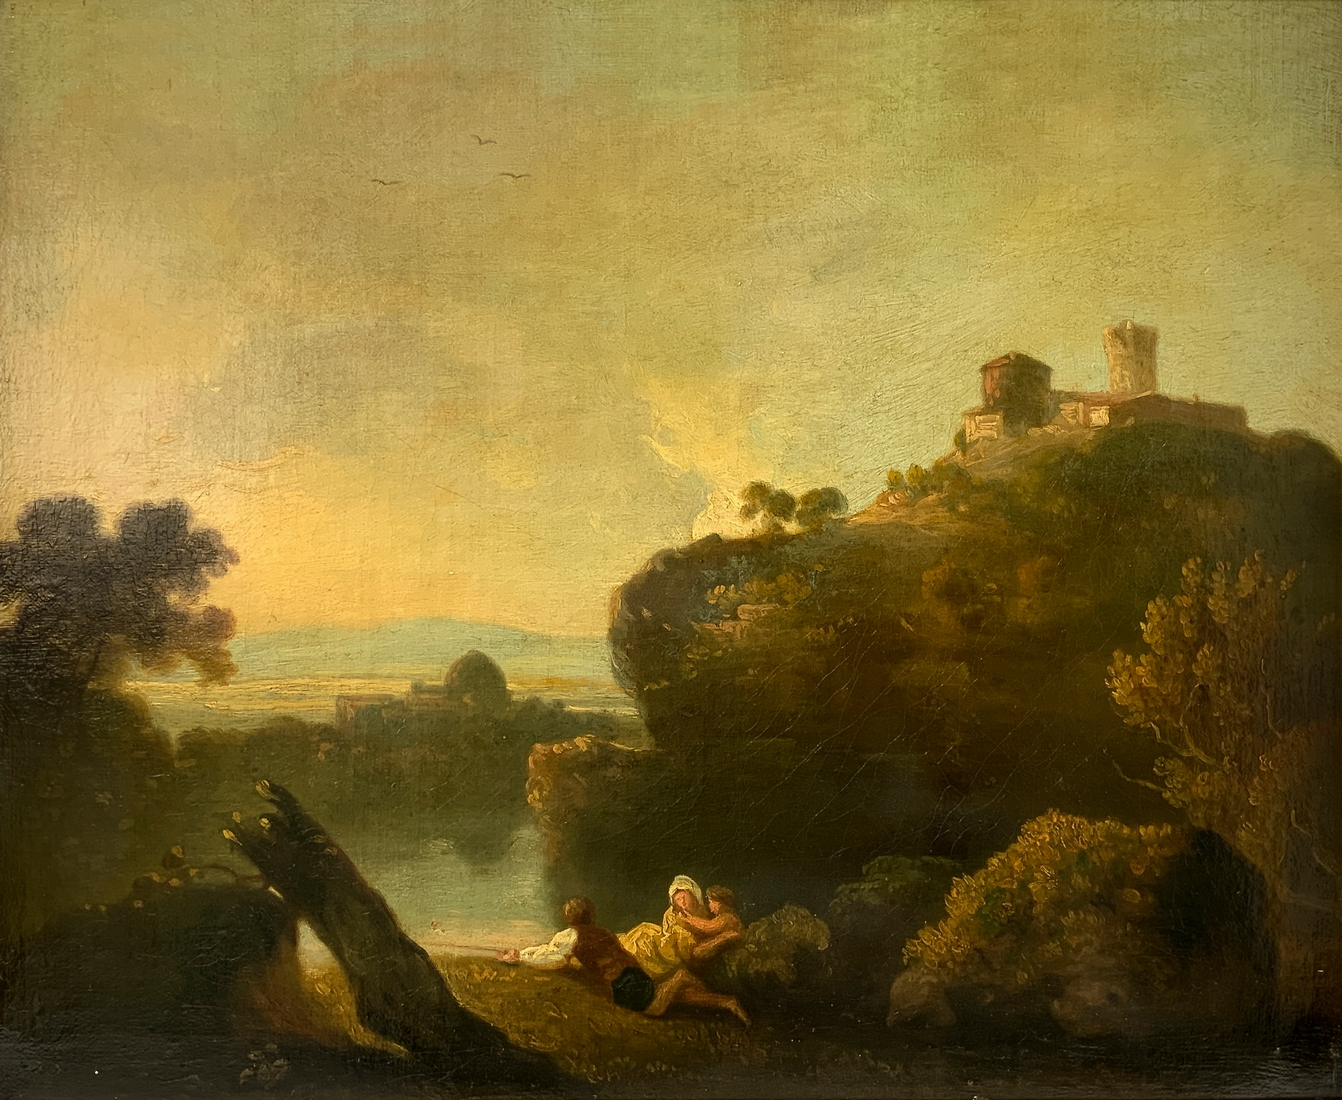 Oil paintinging on canvas depicting Tivoli, allegedly by Richard Wilson (1714-1782). Cm 44x53 in fra